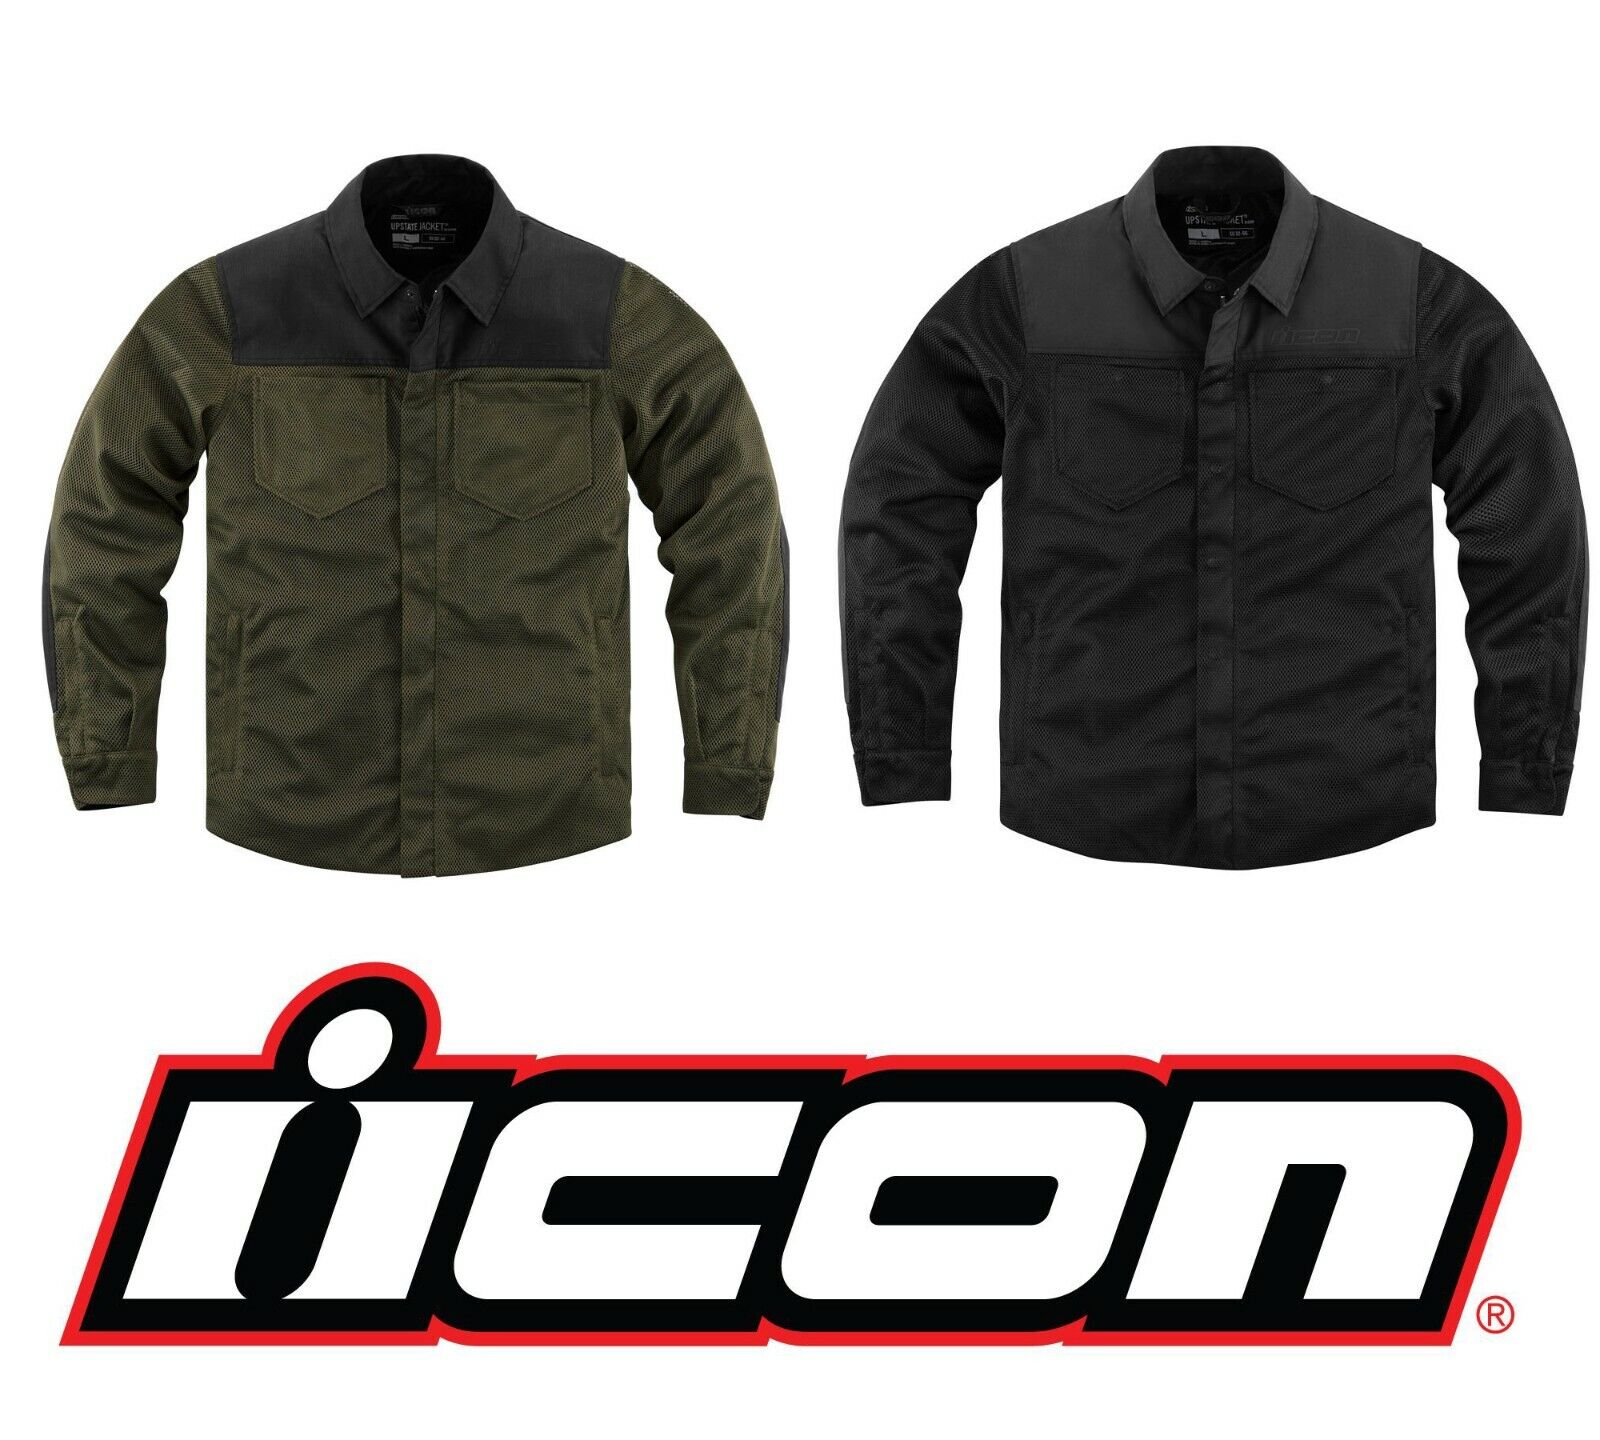 2020 ICON UPSTATE MOTORCYCLE RIDING TEXTILE MESH ARMORED SHIRT - PICK  SIZE/COLOR